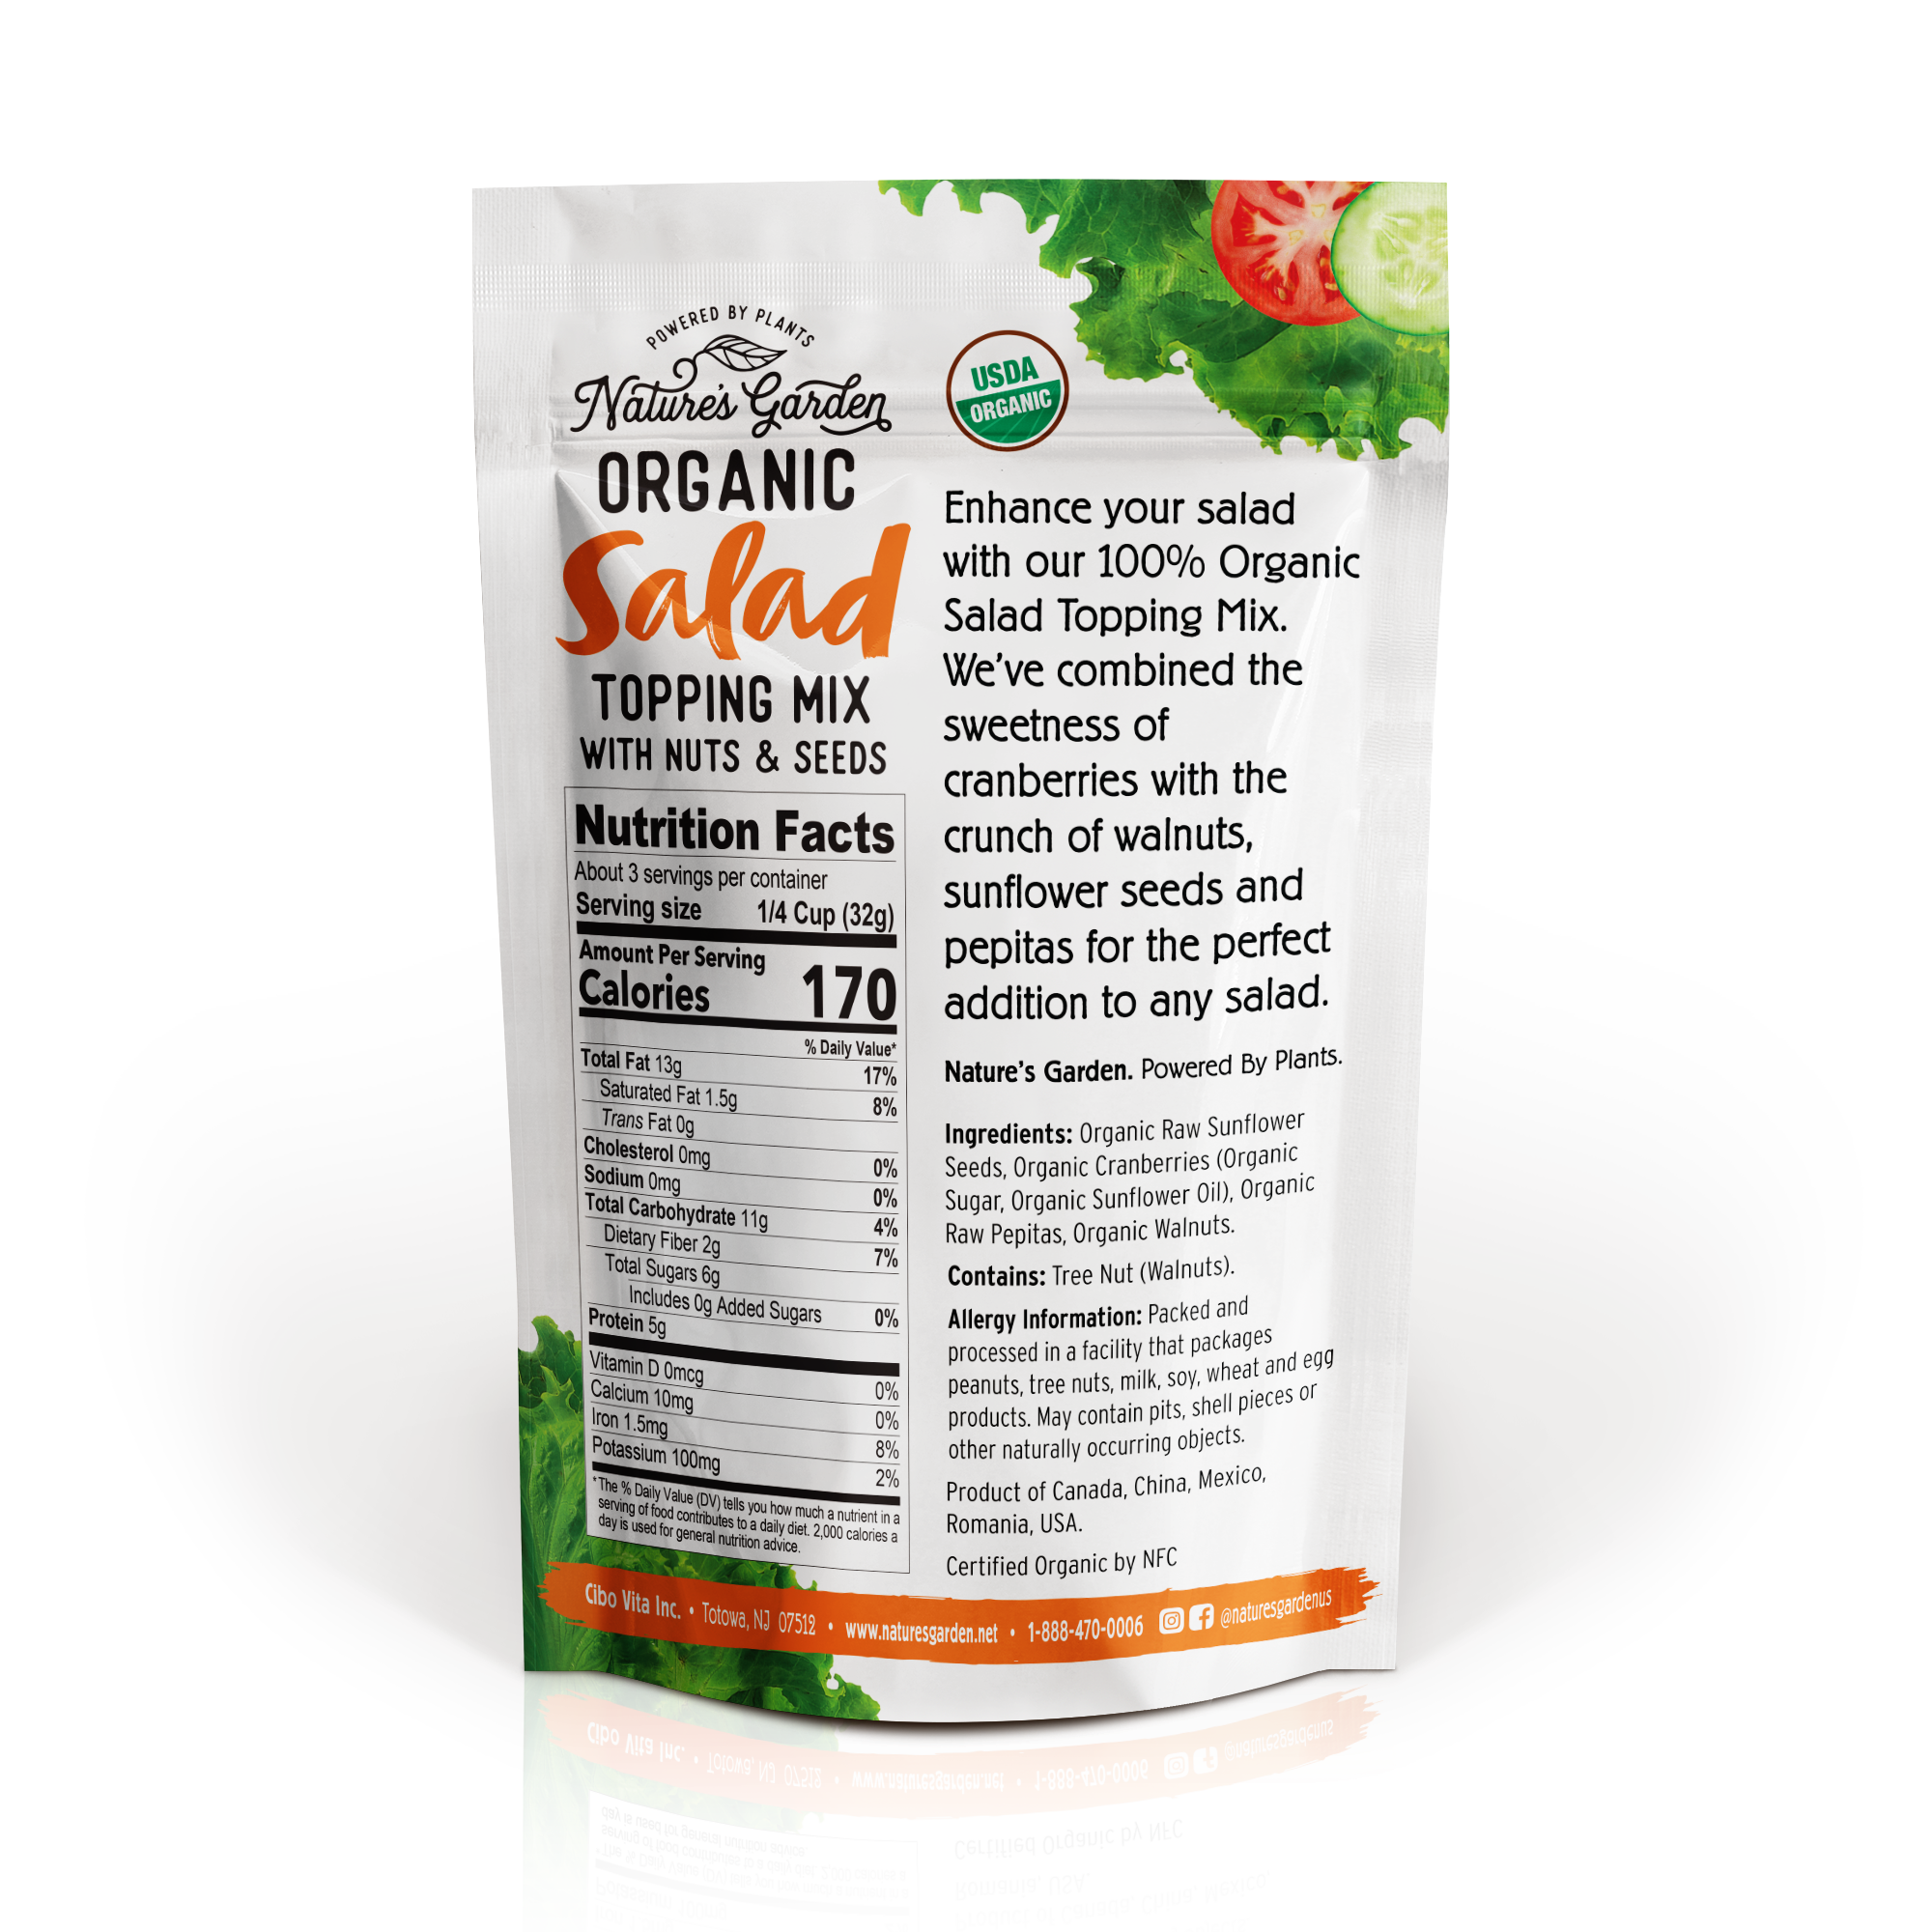 Nature's Garden Organic Seeds Salad Topping, 3.5 oz - image 2 of 4